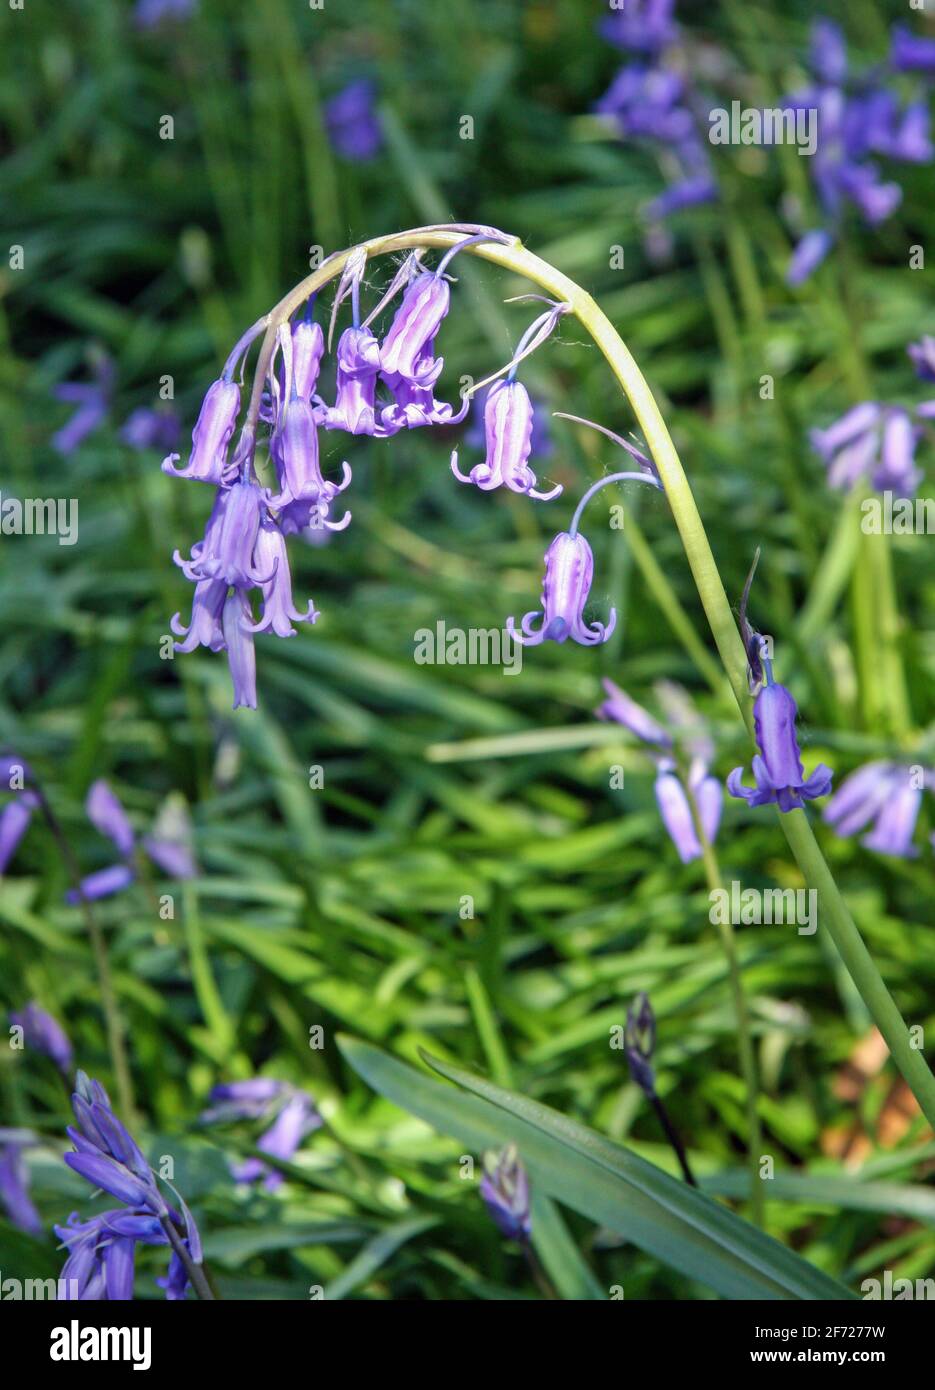 English Bluebells are native to England grow on just one side of the stem. Stock Photo